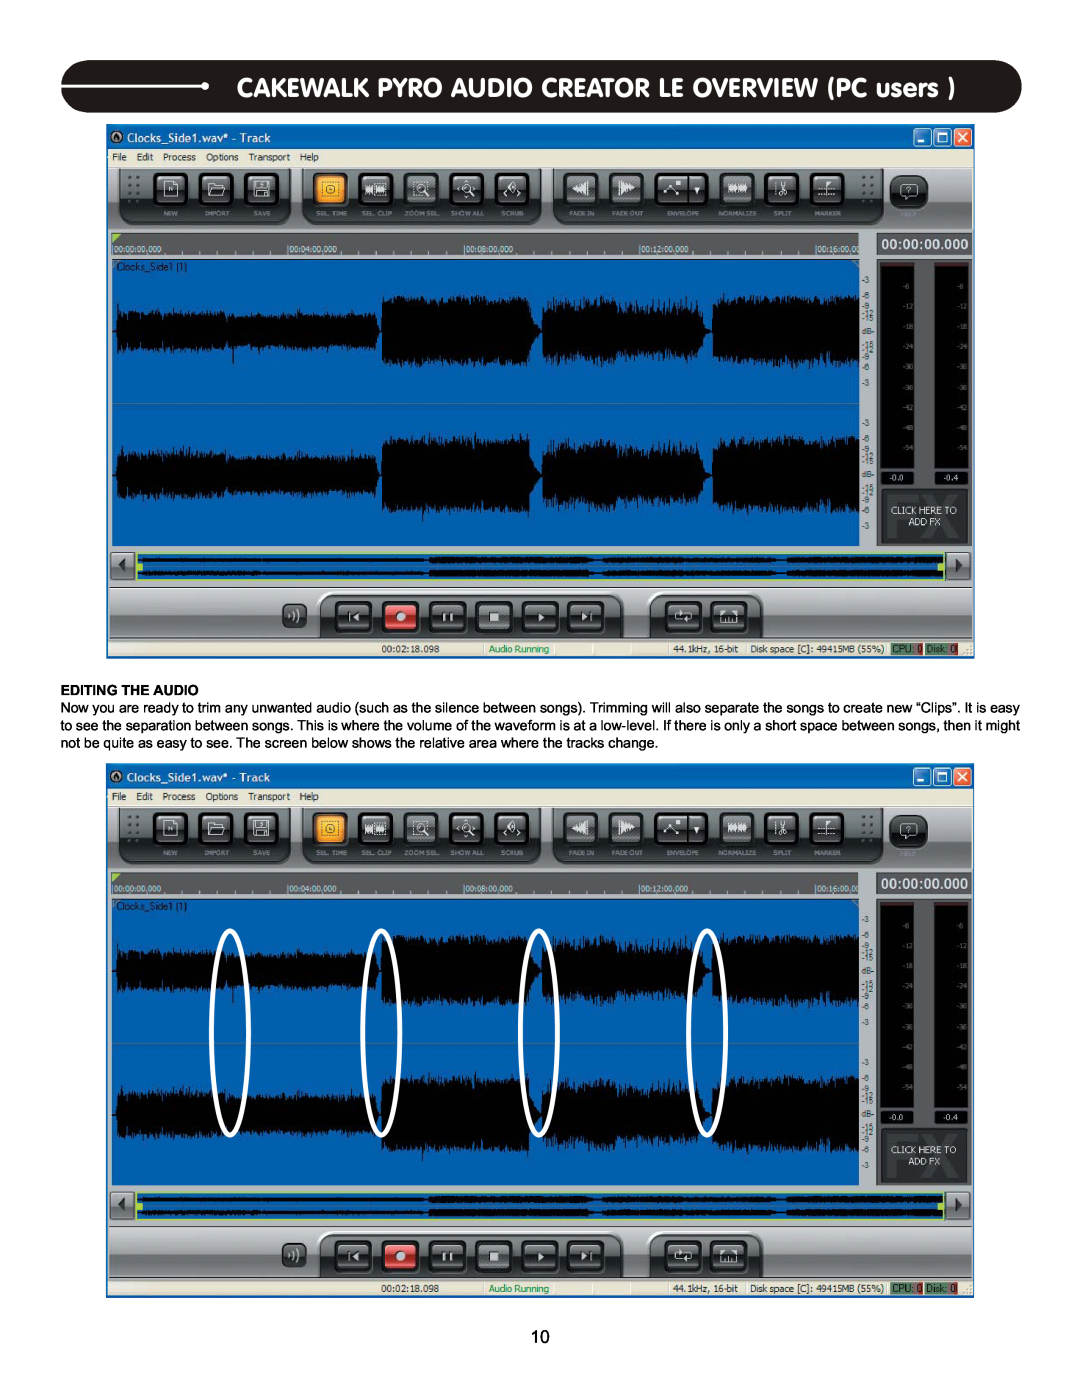 Stanton T.62 user manual CAKEWALK PYRO AUDIO CREATOR LE OVERVIEW PC users, Editing The Audio 